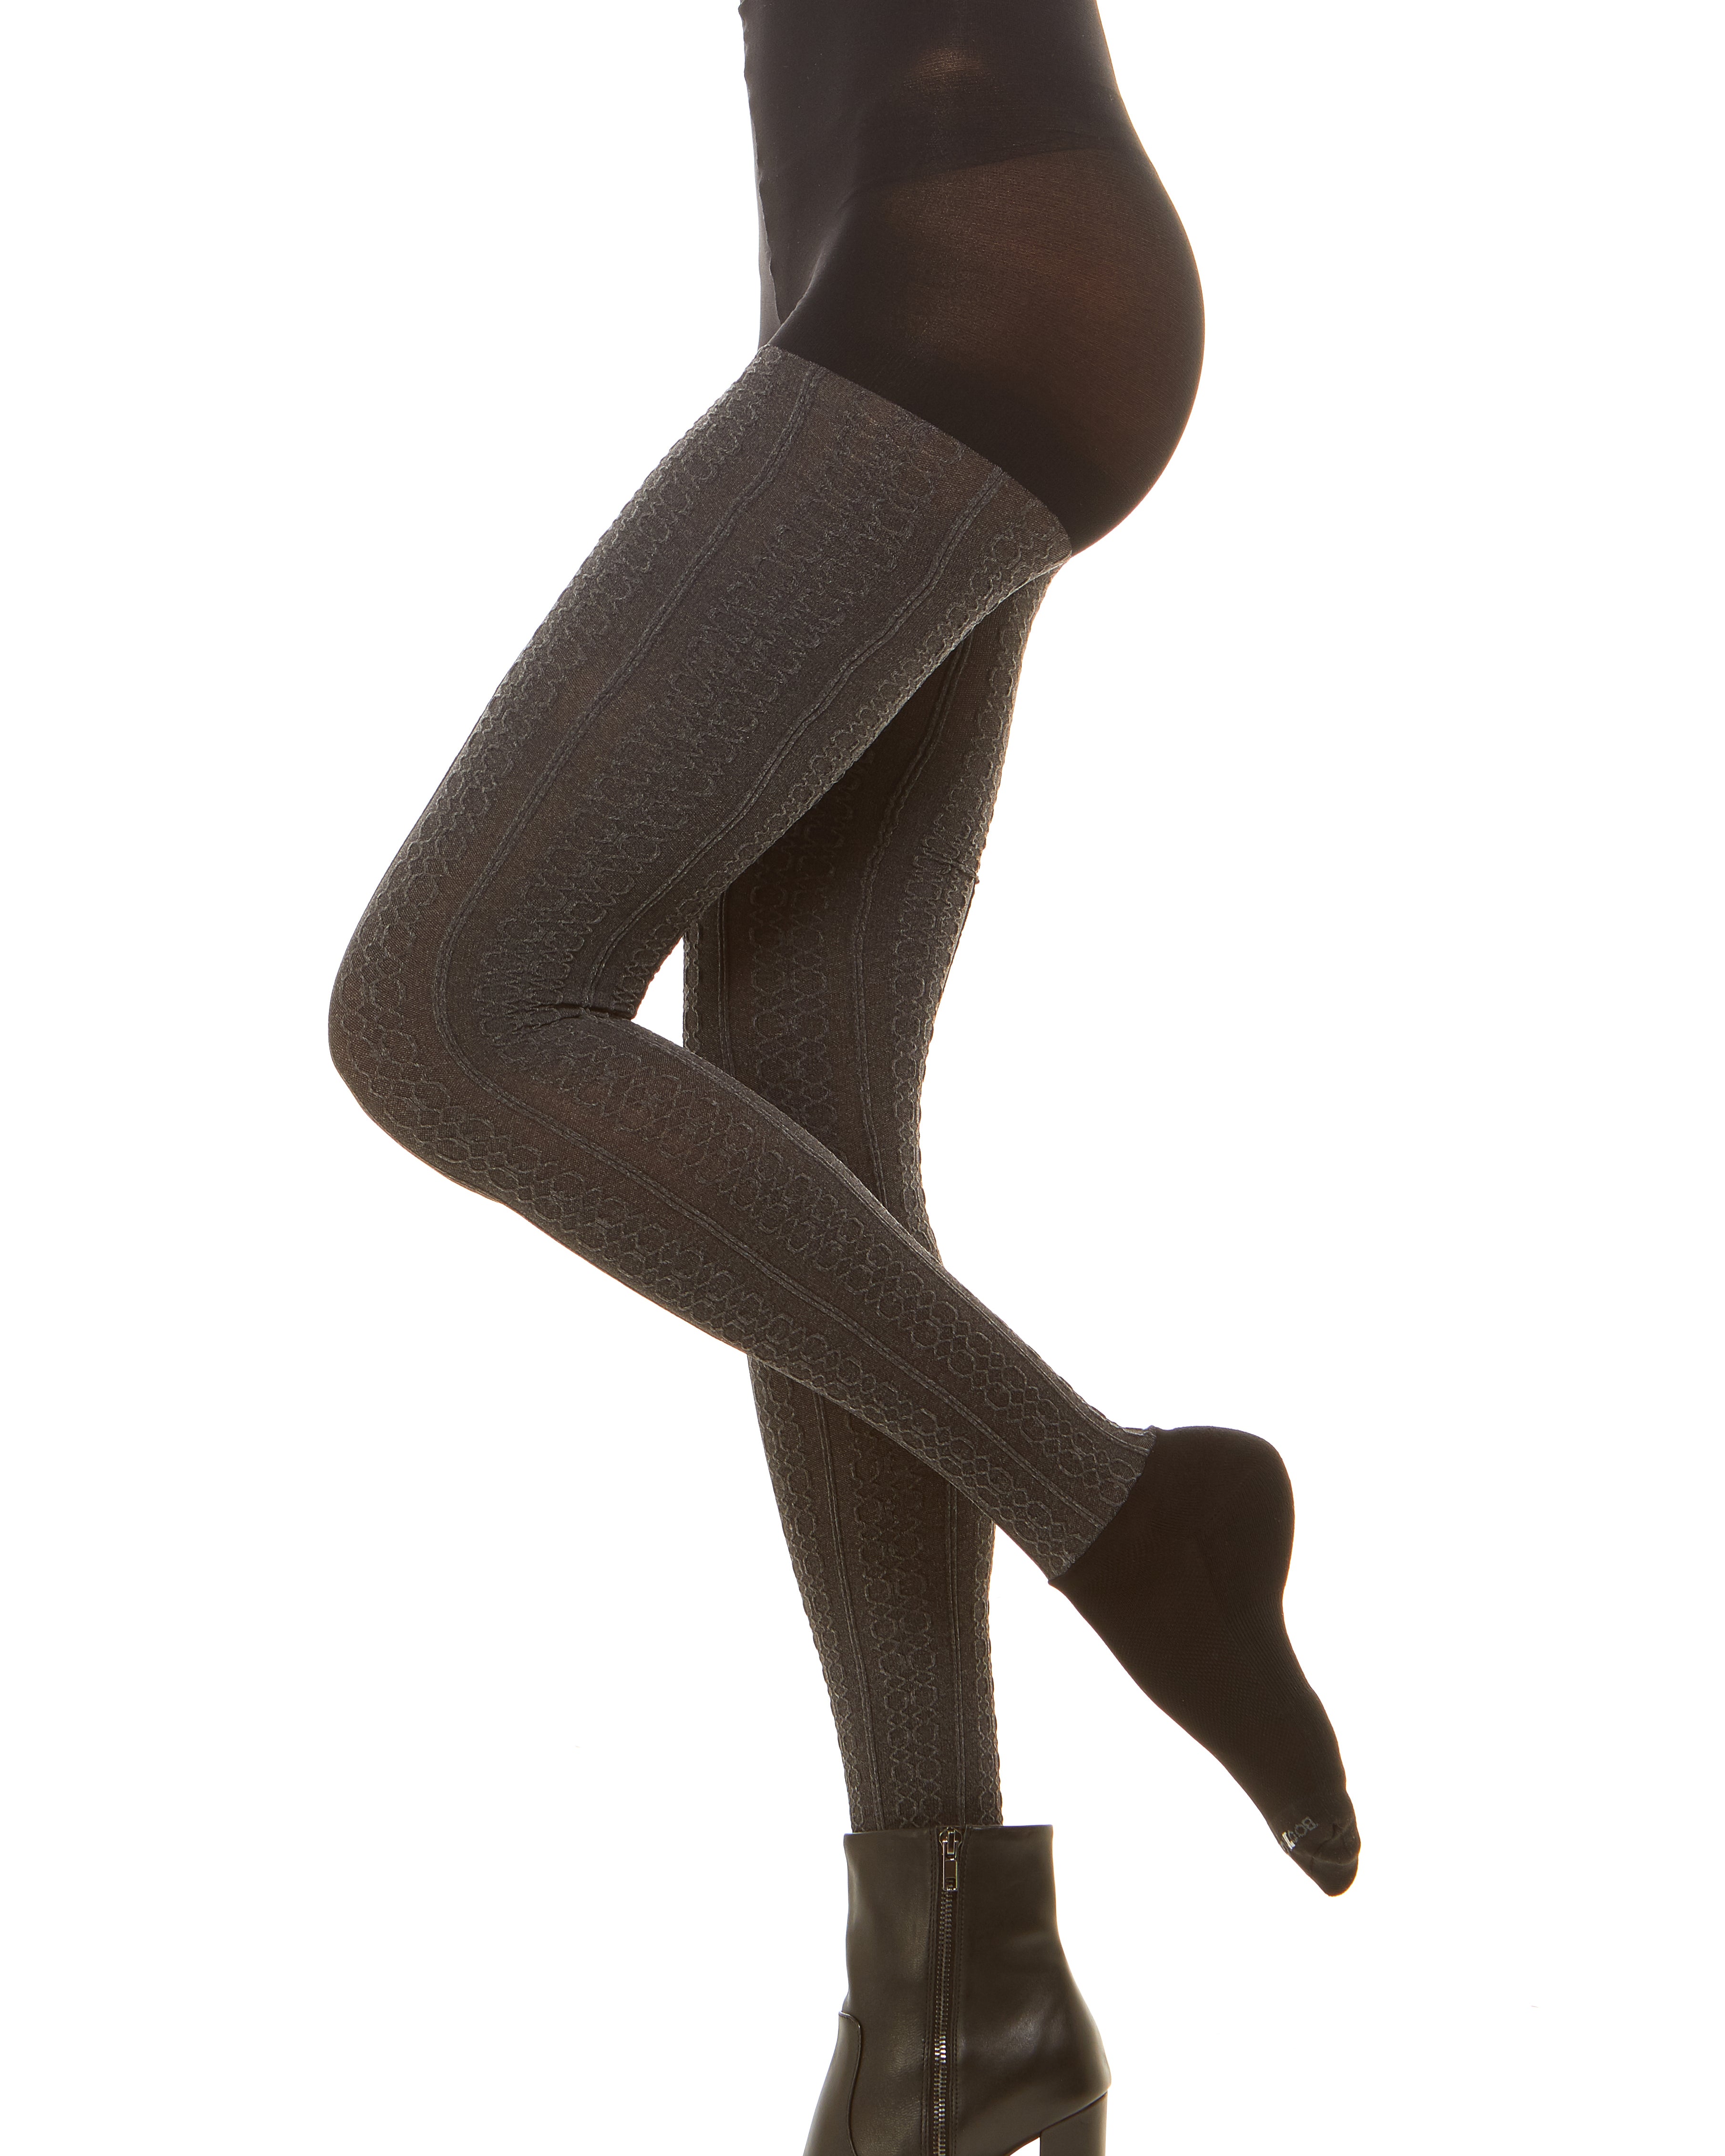 Premium semi opaque women’s tights in a cable knit pattern with attached performance athletic socks and tummy control waistband 